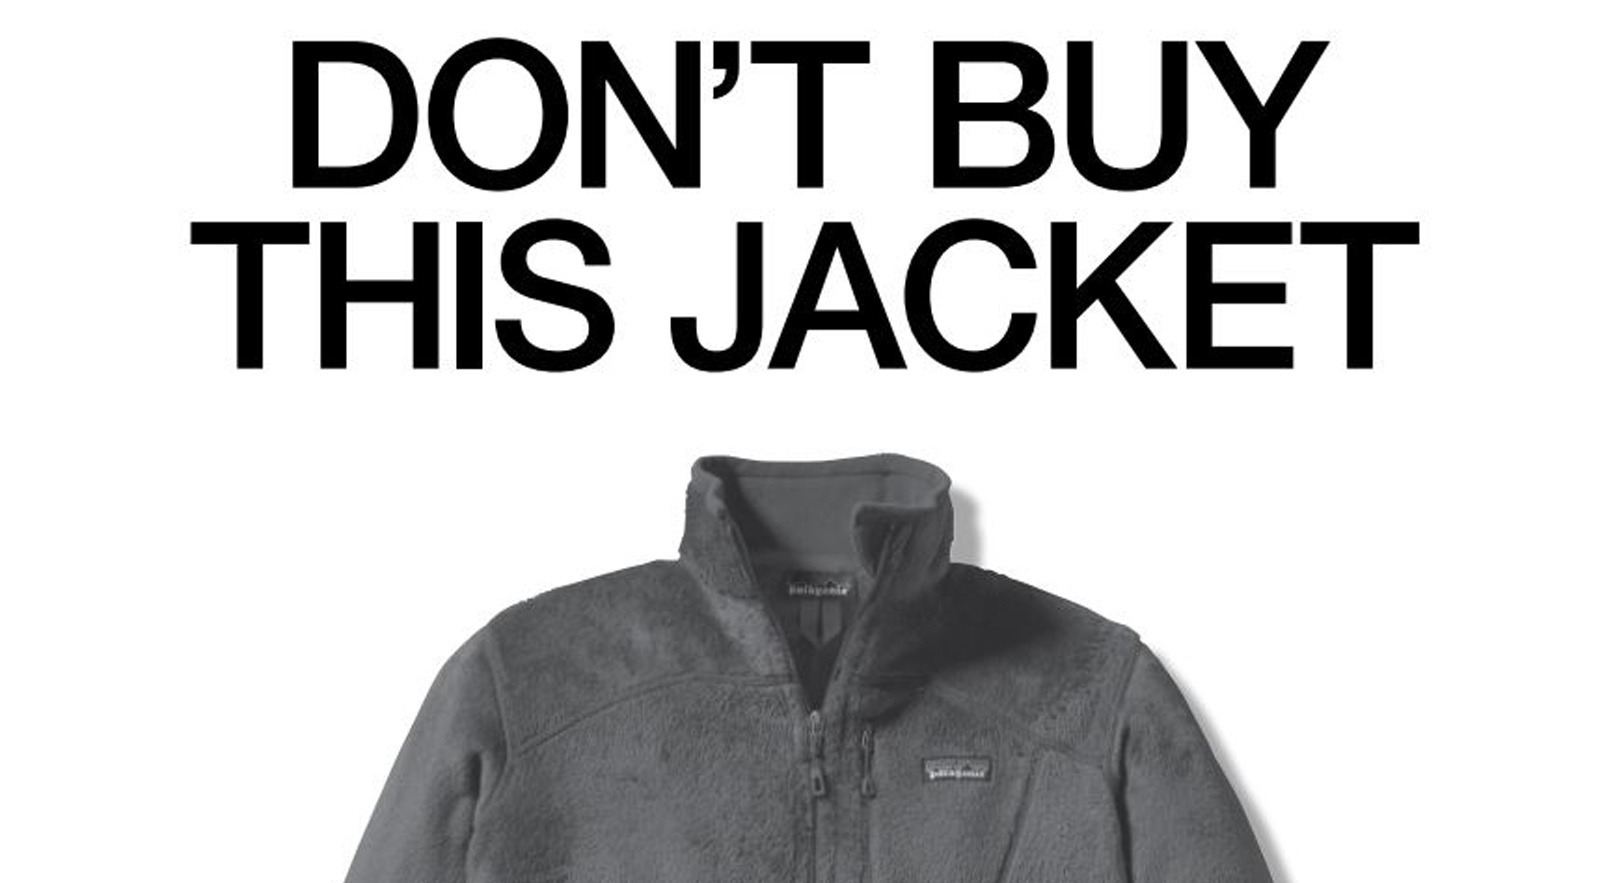 Picture of jacket; above, big words in all caps "Don't buy this jacket"